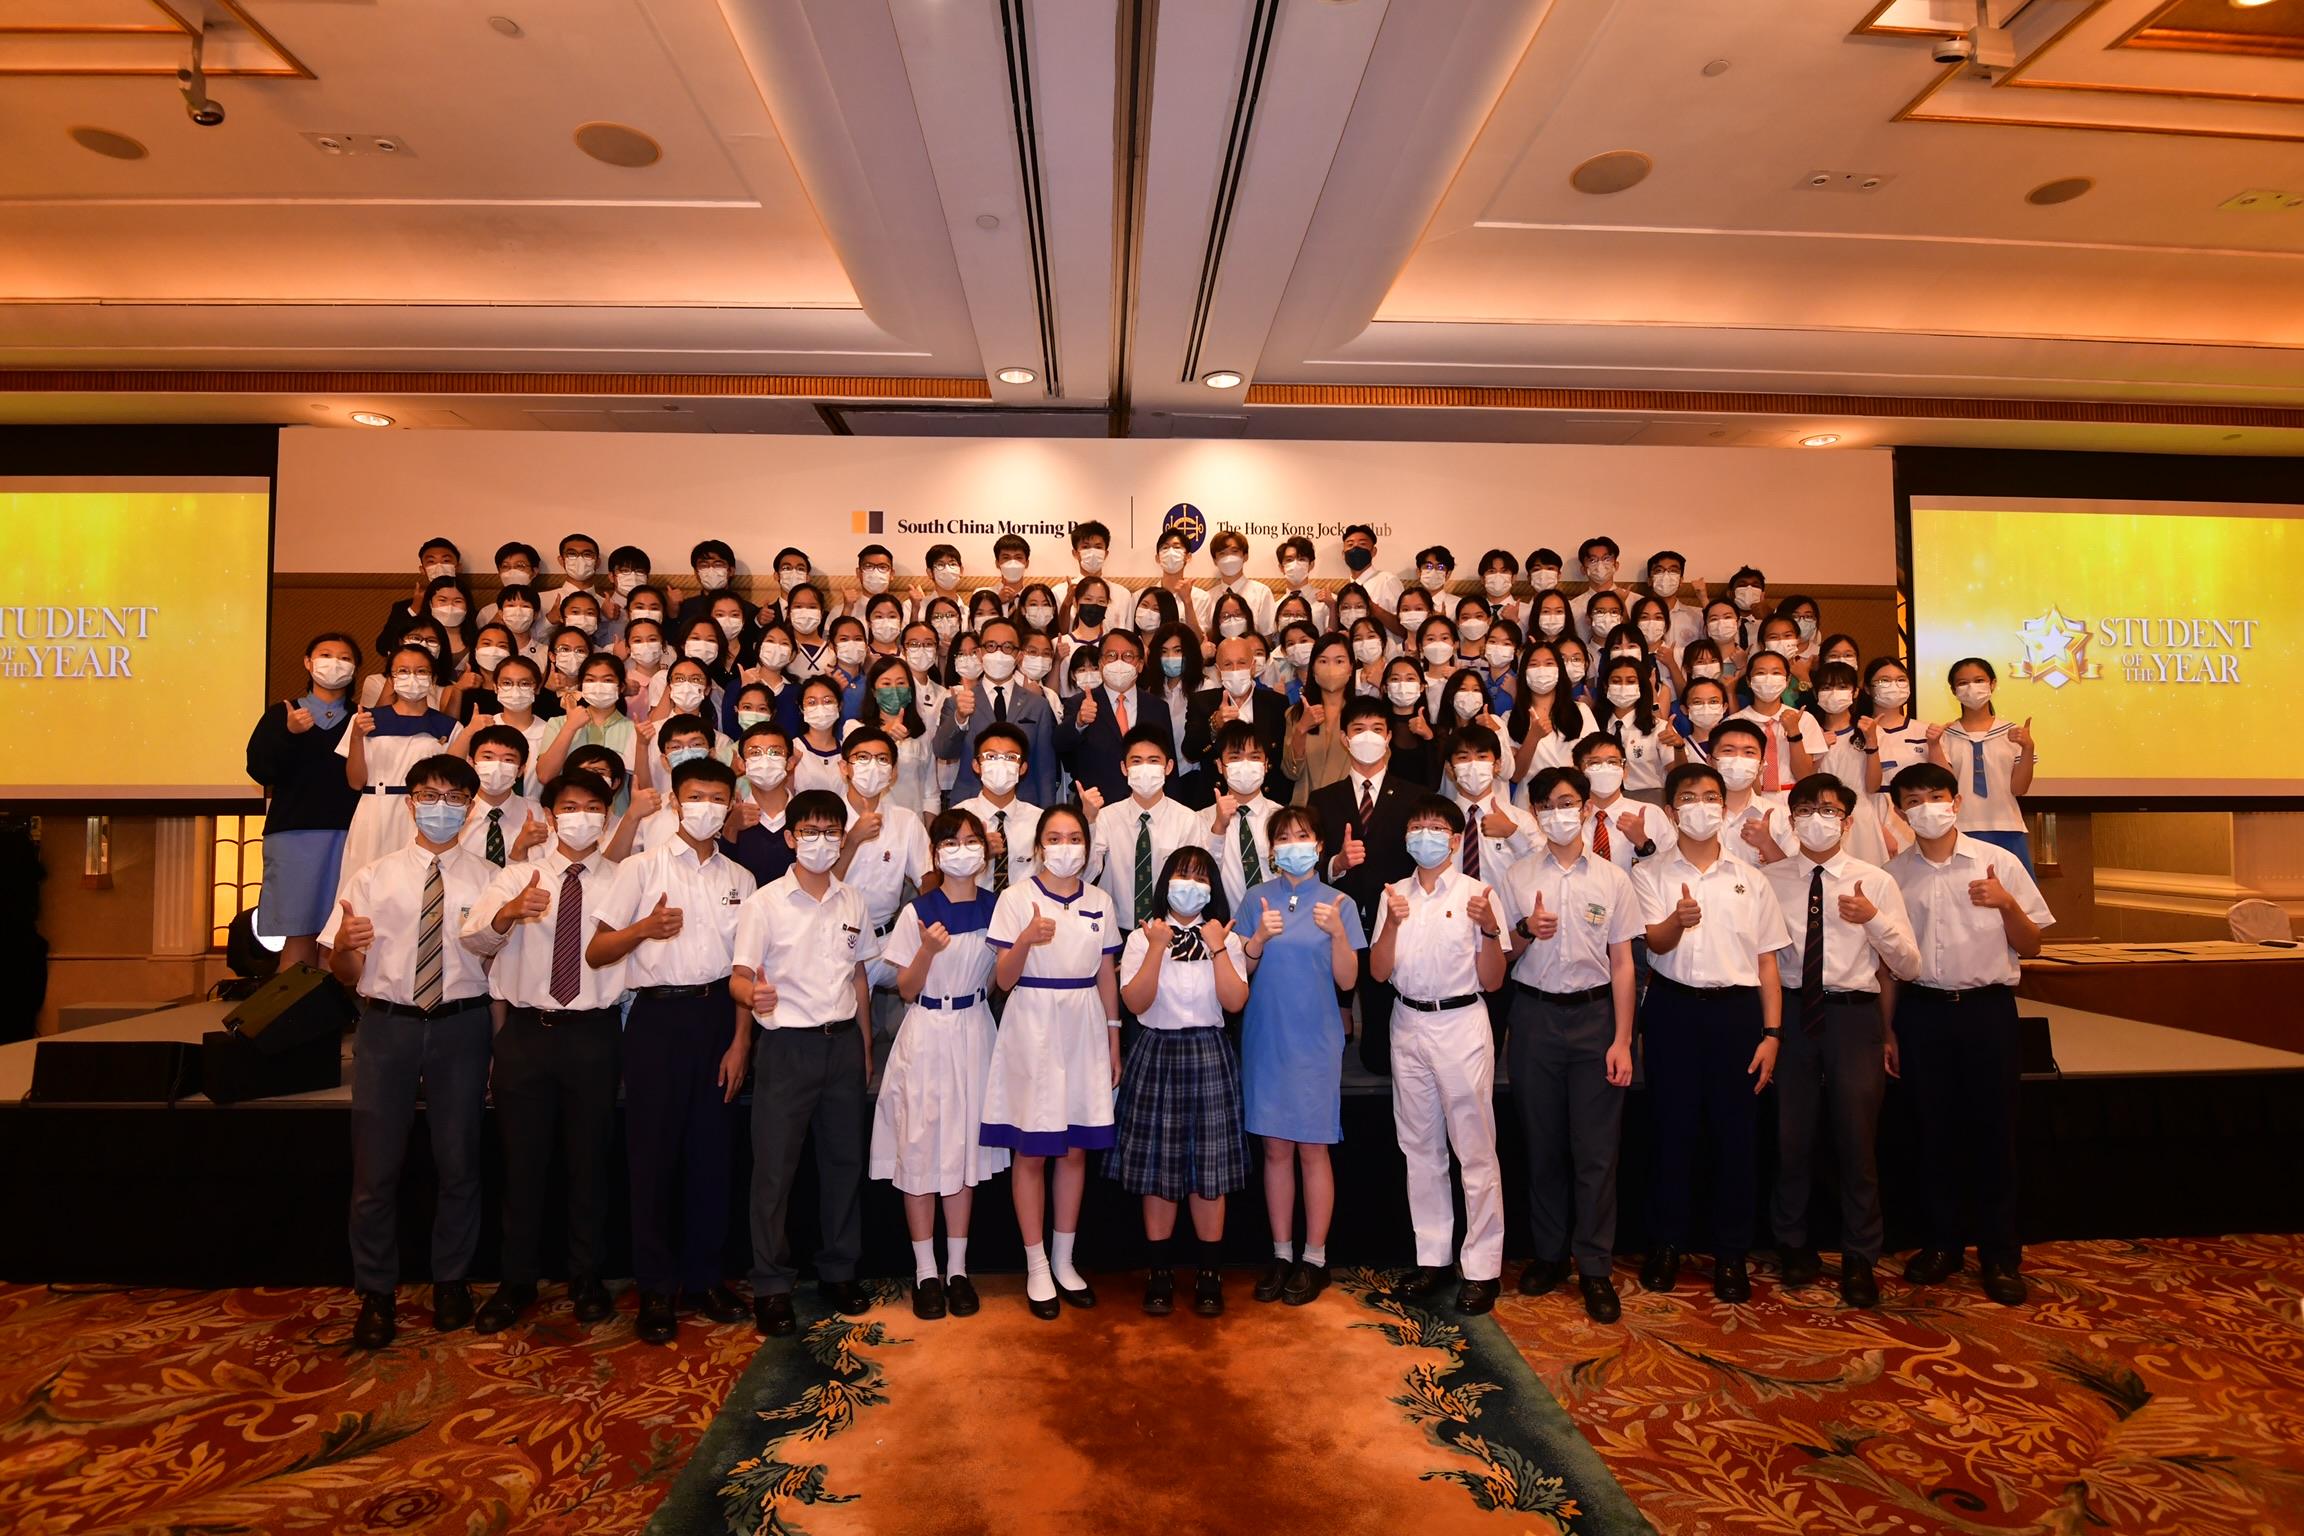 The Chief Secretary for Administration, Mr Chan Kwok-ki, attended the Student of the Year Awards 2021/22 Presentation Ceremony today (July 23). Photo shows Mr Chan (third row, tenth left); the Chief Executive Officer of the South China Morning Post (SCMP), Ms Catherine So (third row, twelfth left); the Executive Director, Charities and Community (Designate) of The Hong Kong Jockey Club, Dr Gabriel Leung (third row, ninth left); the Editor-in-Chief of the SCMP, Ms Tammy Tam (third row, eighth left), member of the advisory board, Dr Allan Zeman (third row, eleventh left); and students at the ceremony.